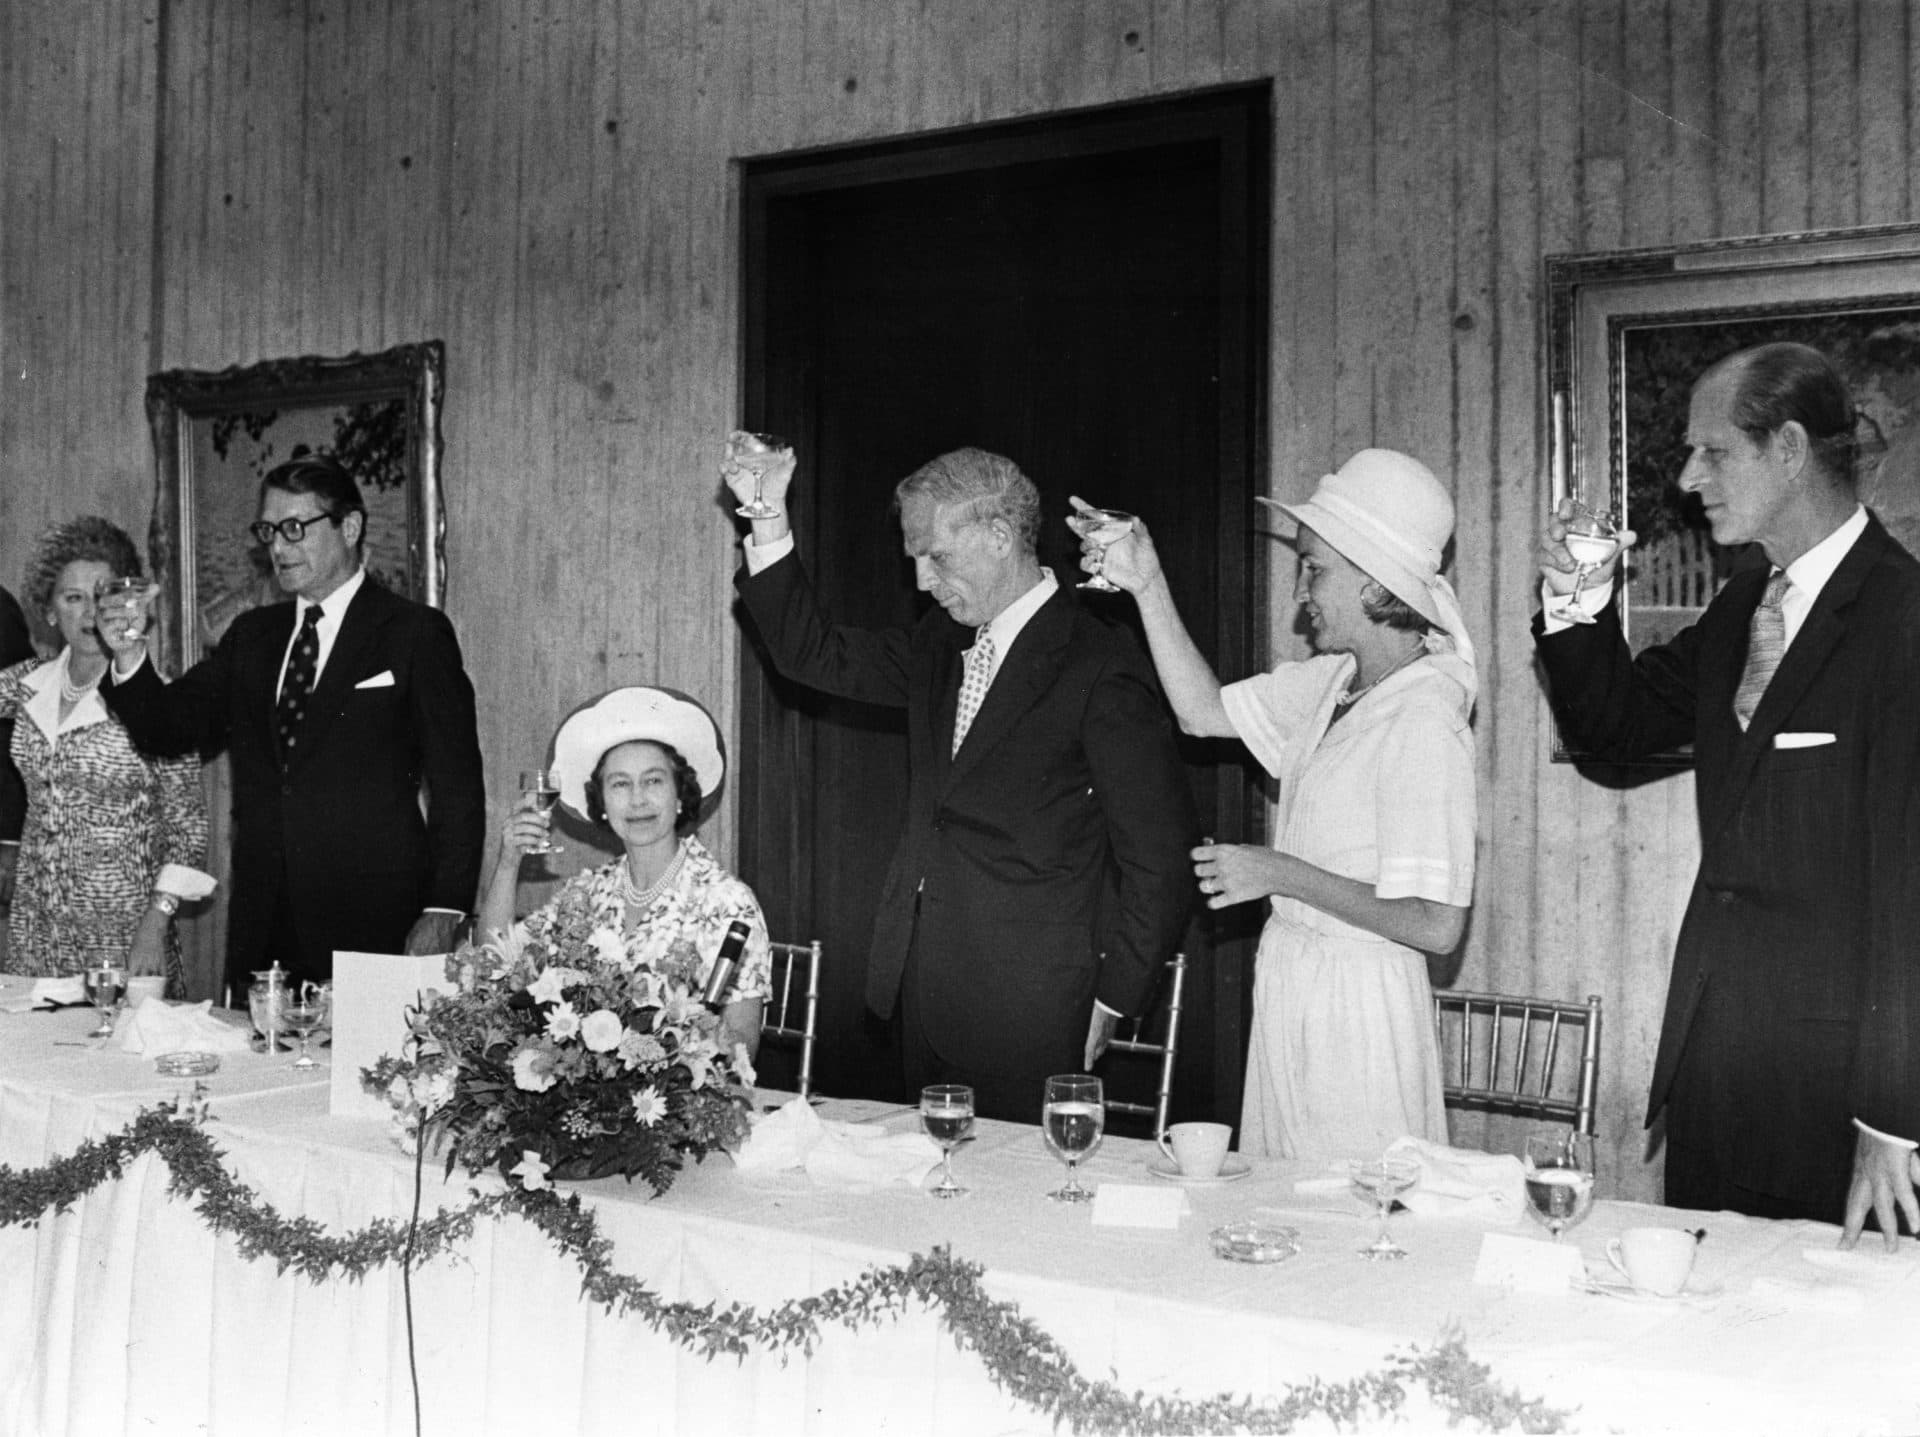 Queen Elizabeth II is toasted at a luncheon at Boston City Hall during her visit to Boston, July 11, 1976. Prince Philip is at right. (Charles Dixon/The Boston Globe via Getty Images)